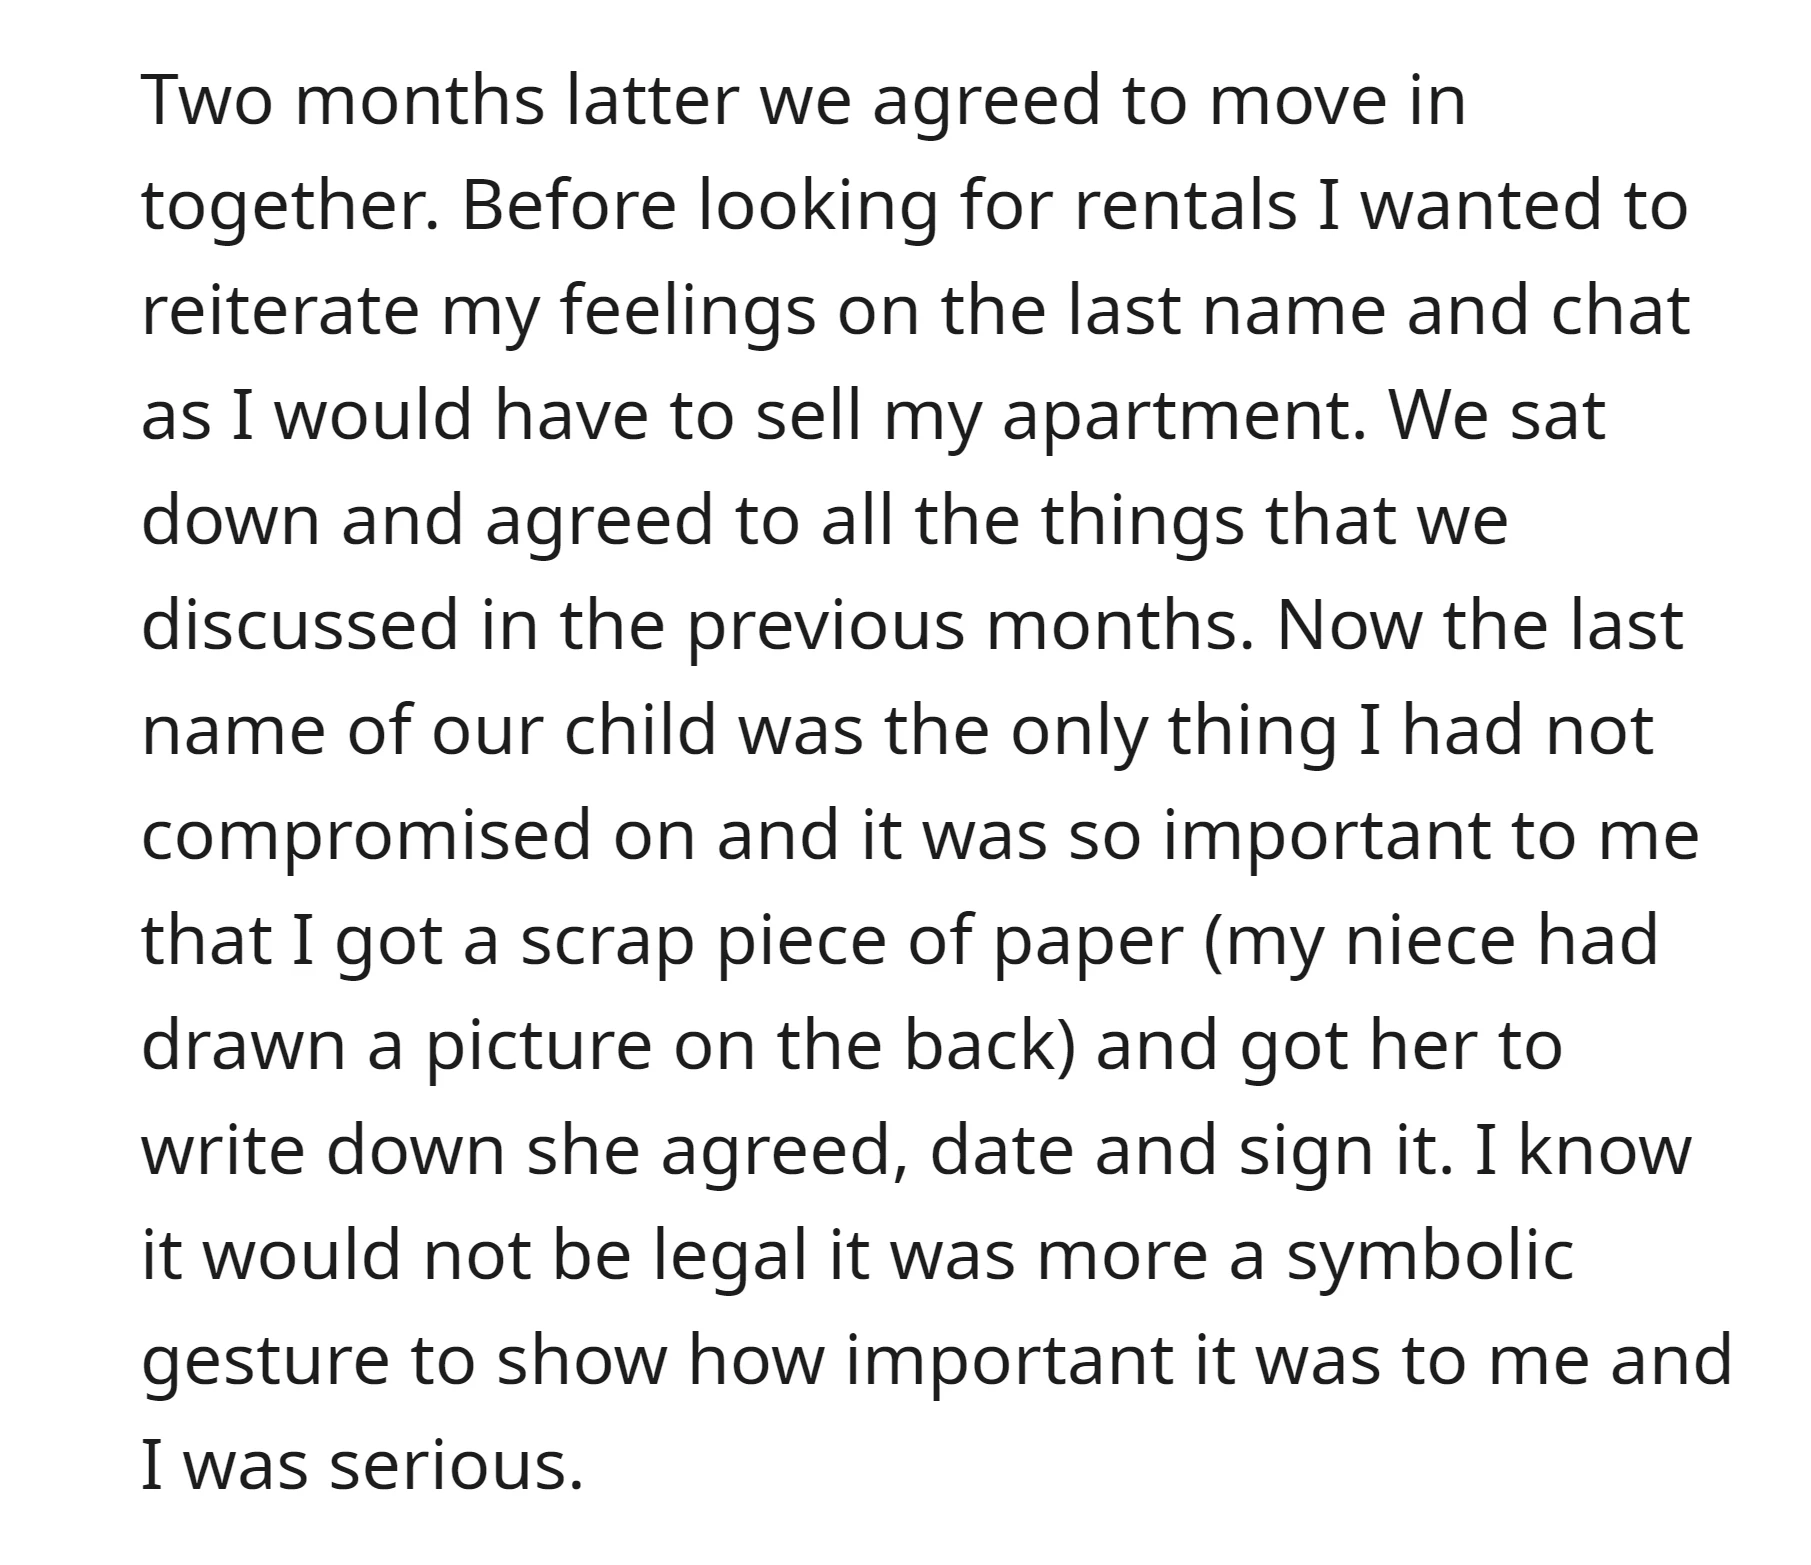 The OP gave his wife a paper and got her write down she agreed what they had discussed